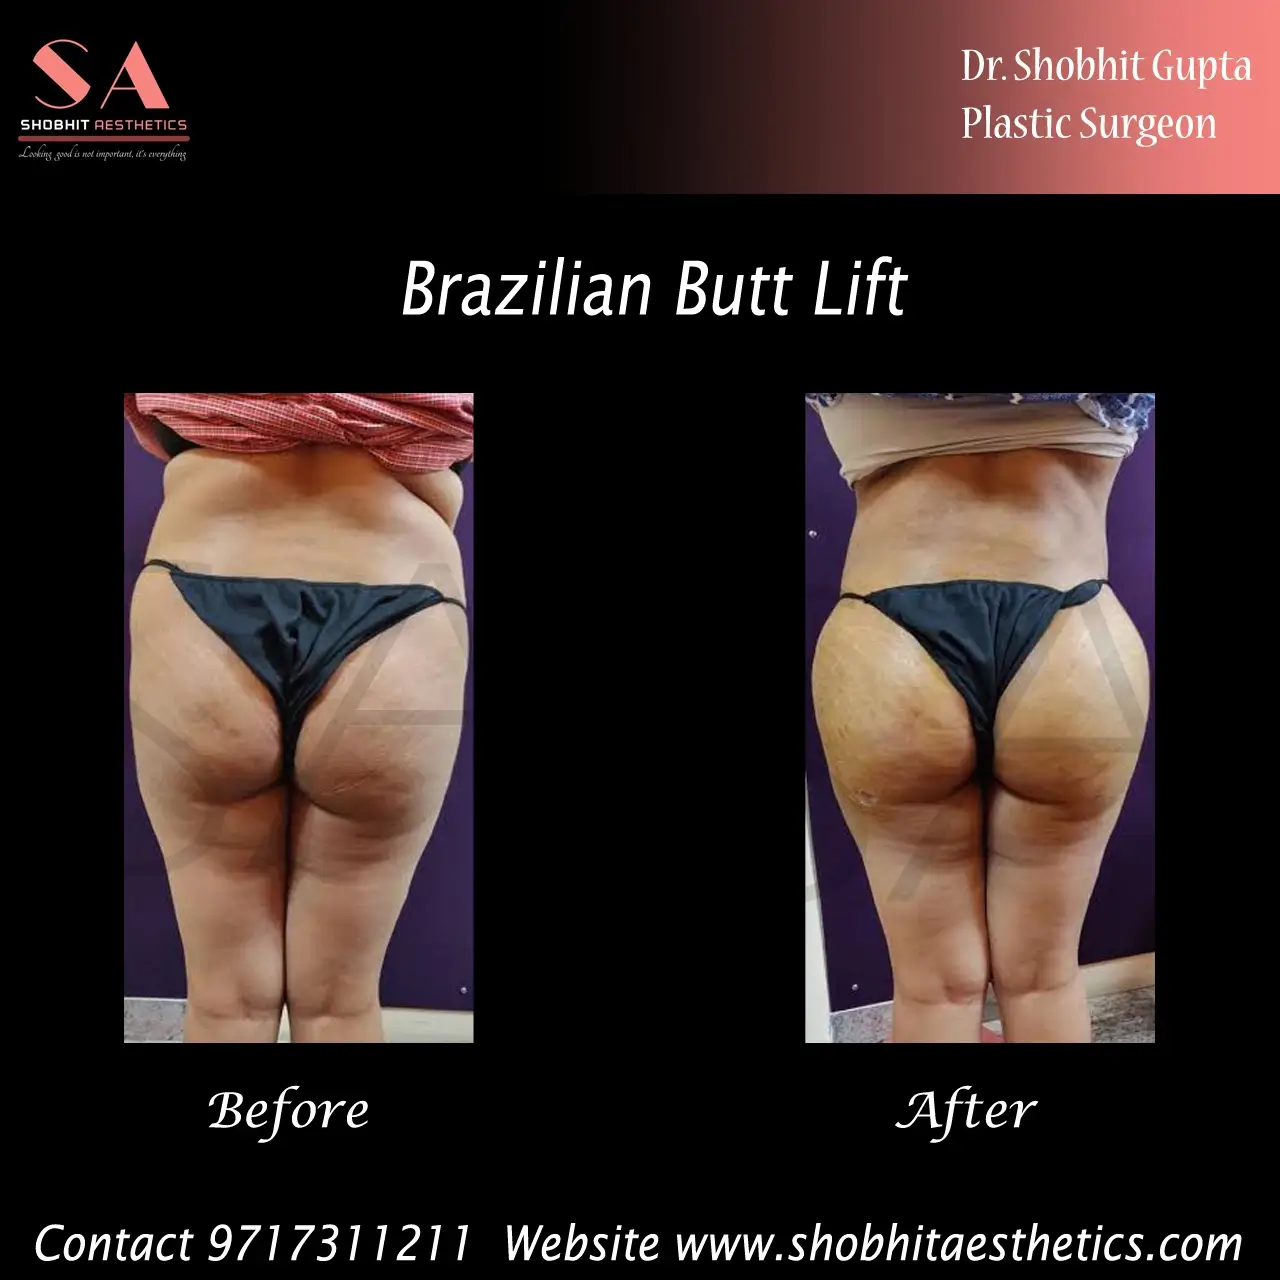 Post Op Recommendations for the Brazilian Butt Lift (BBL) - Marvel Cosmetic  Surgery